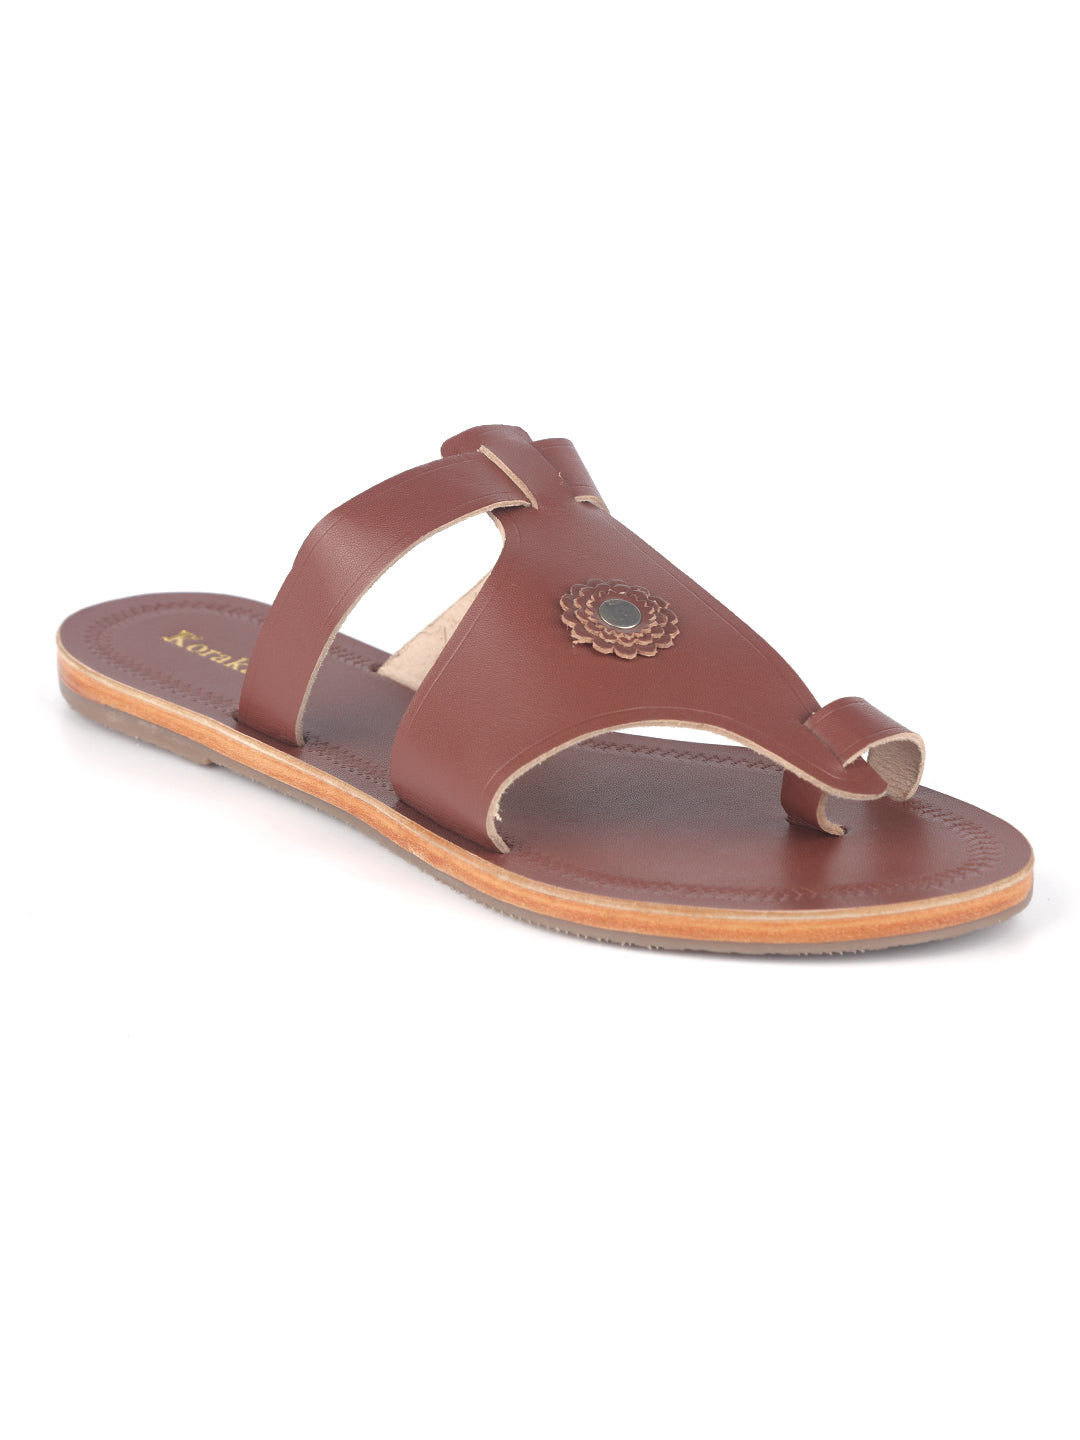 Unique Red Brown buy kolhapuri chappal for women